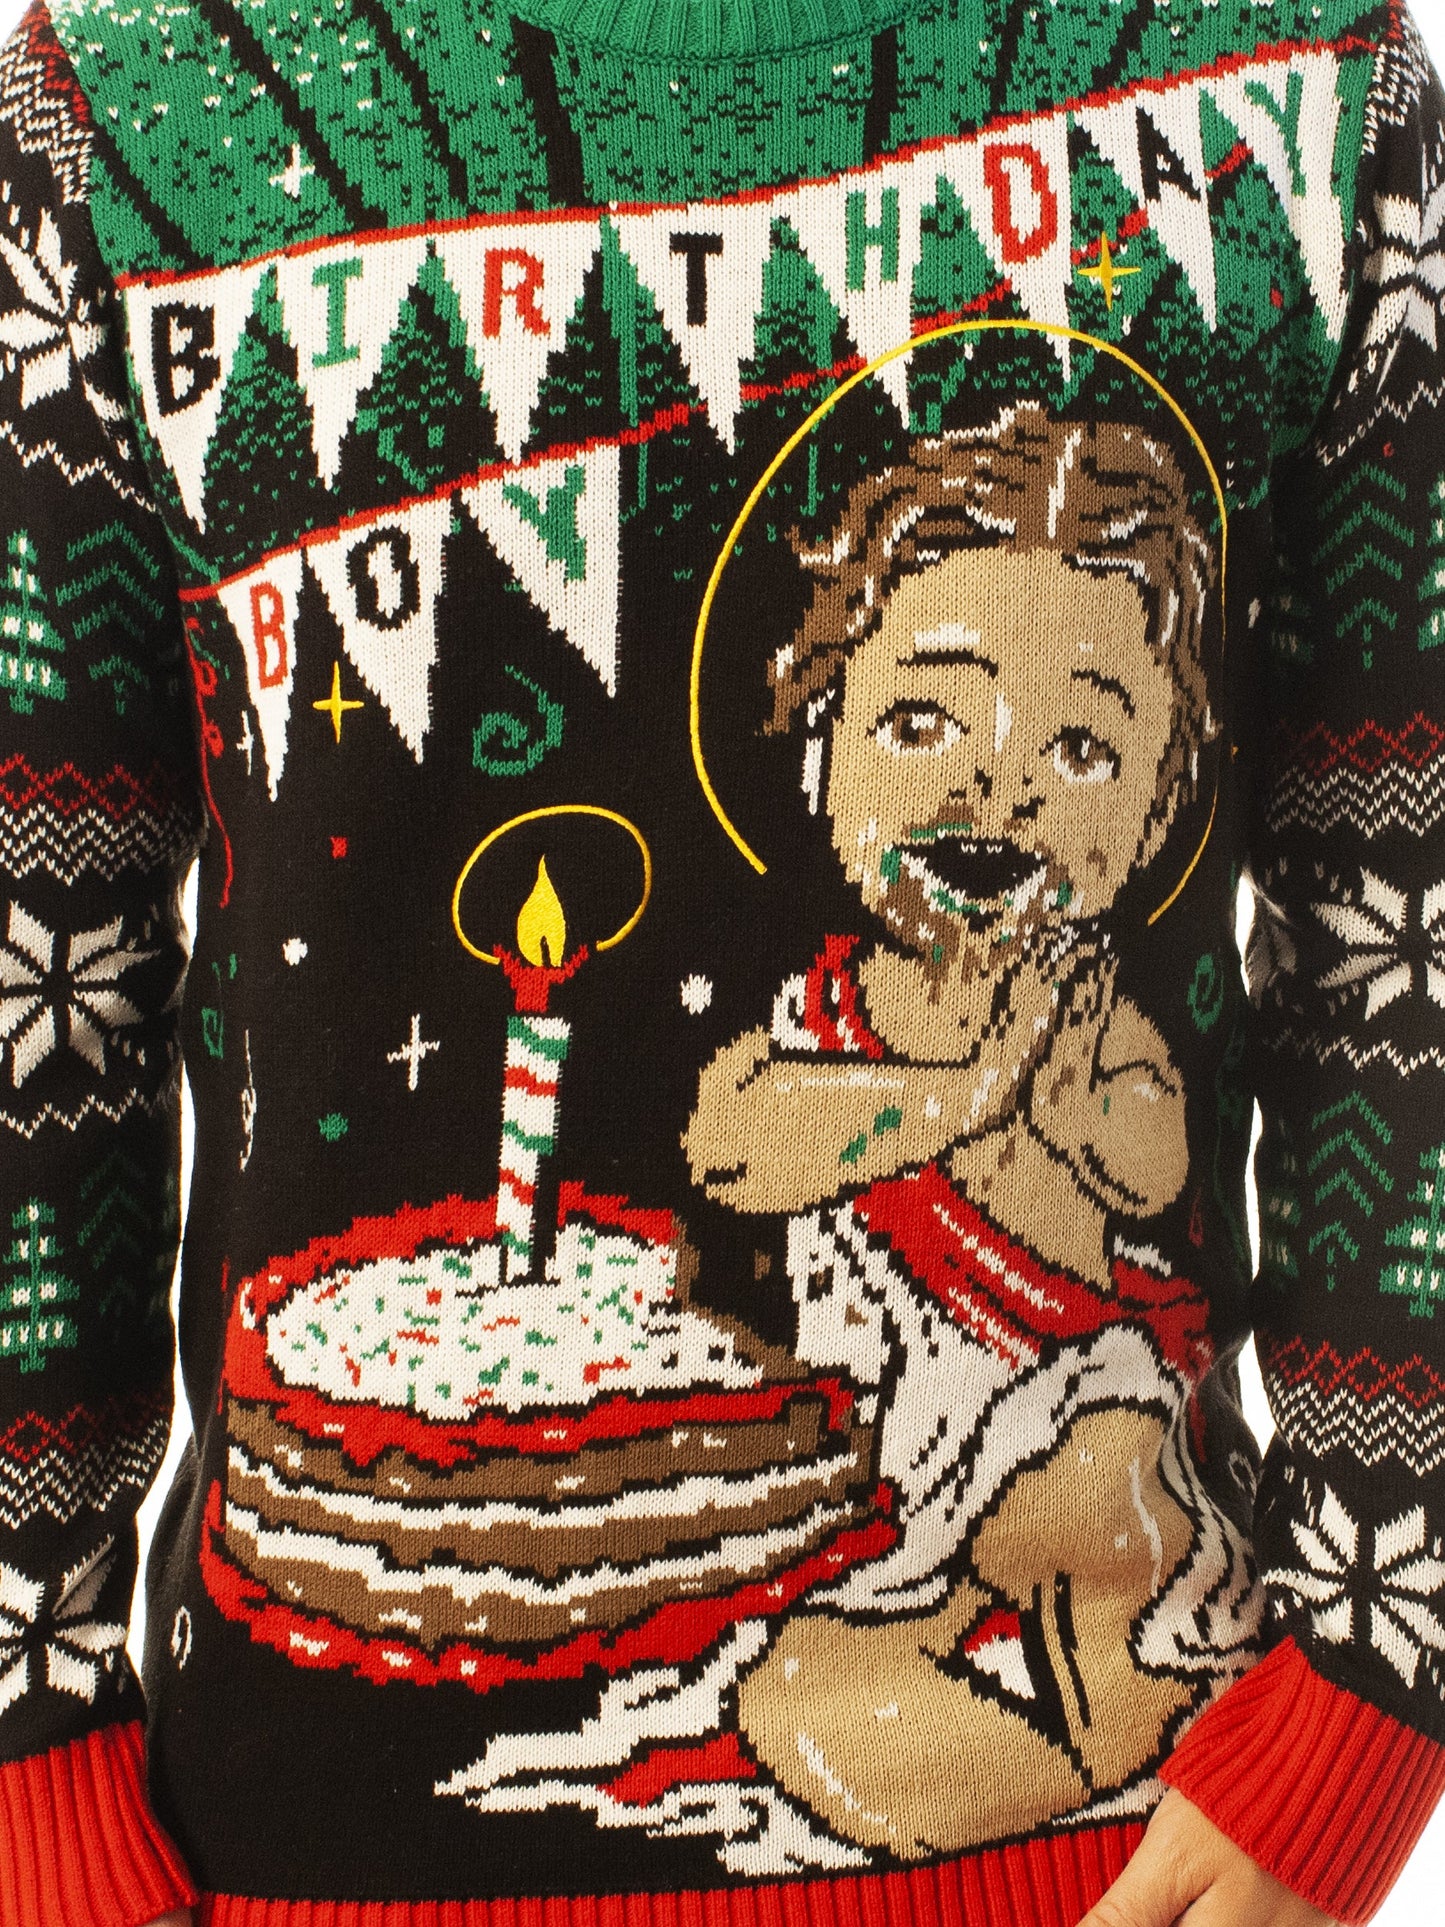 Jesus Birthday Boy Cake Smash Ugly Christmas Sweater - Xmas Gifts For Him Or Her - Jesus Christ Sweater - Christian Shirts Gifts Idea